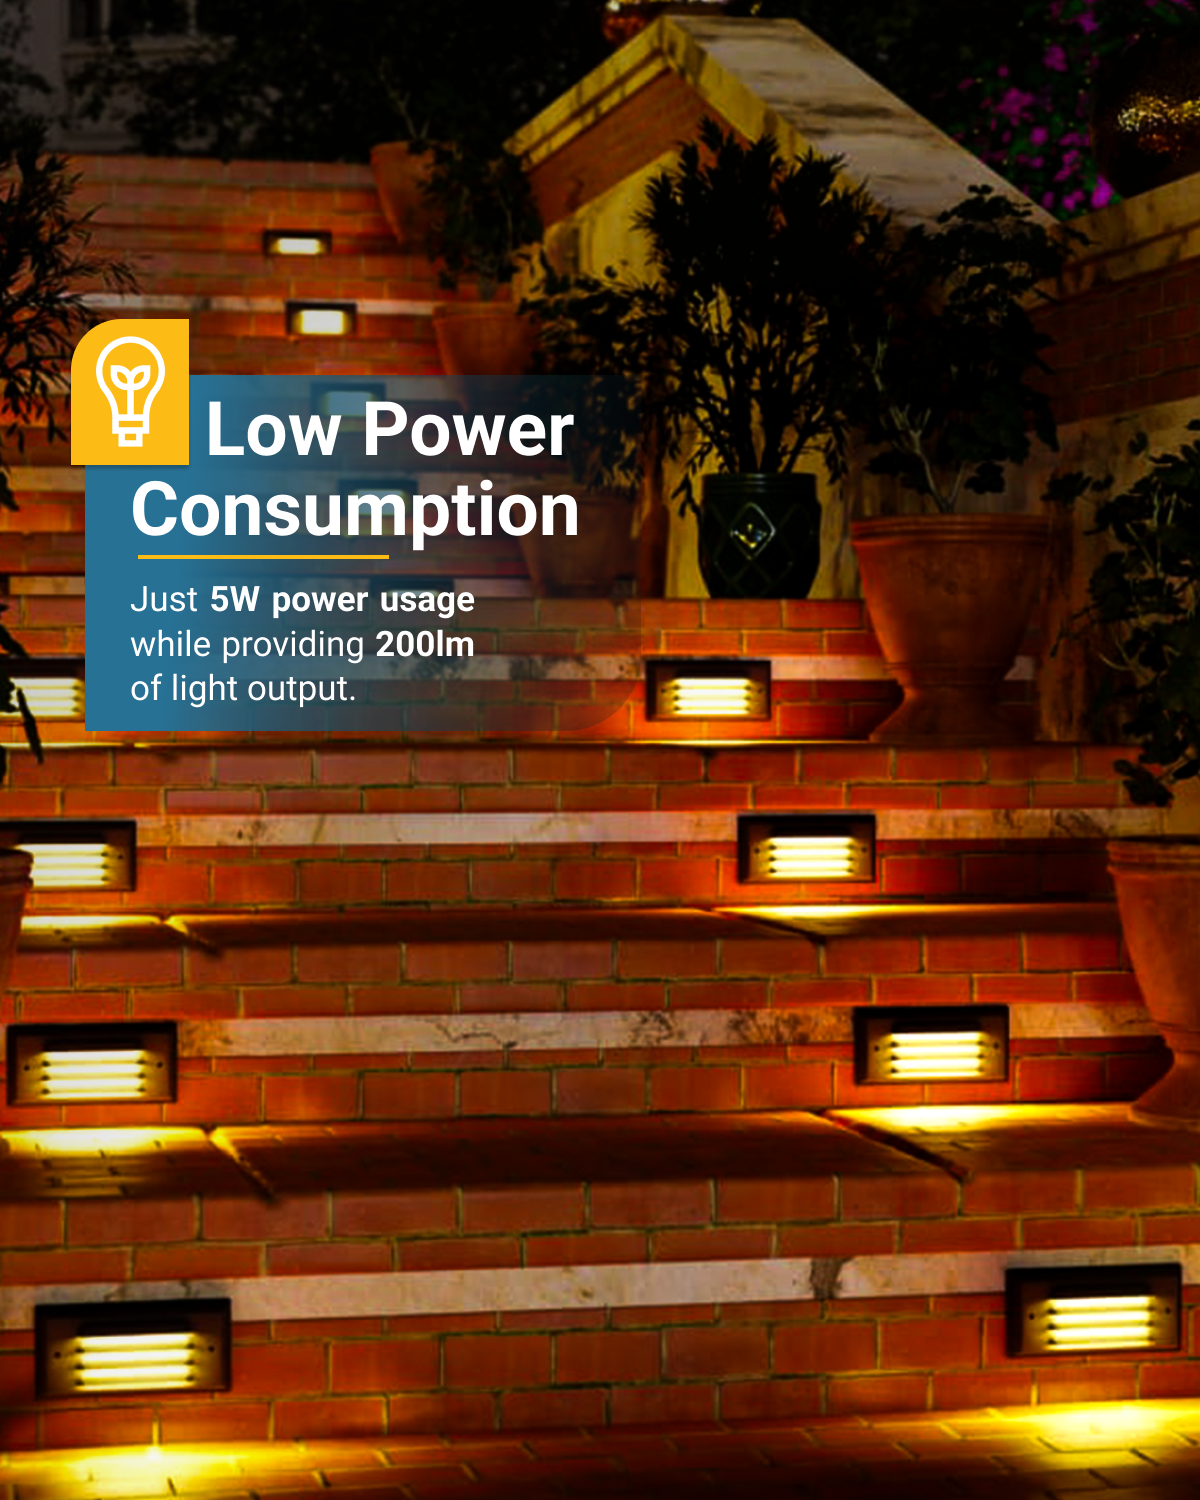 While setup is low-voltage, you'll still receive maximum illumination while saving on energy.